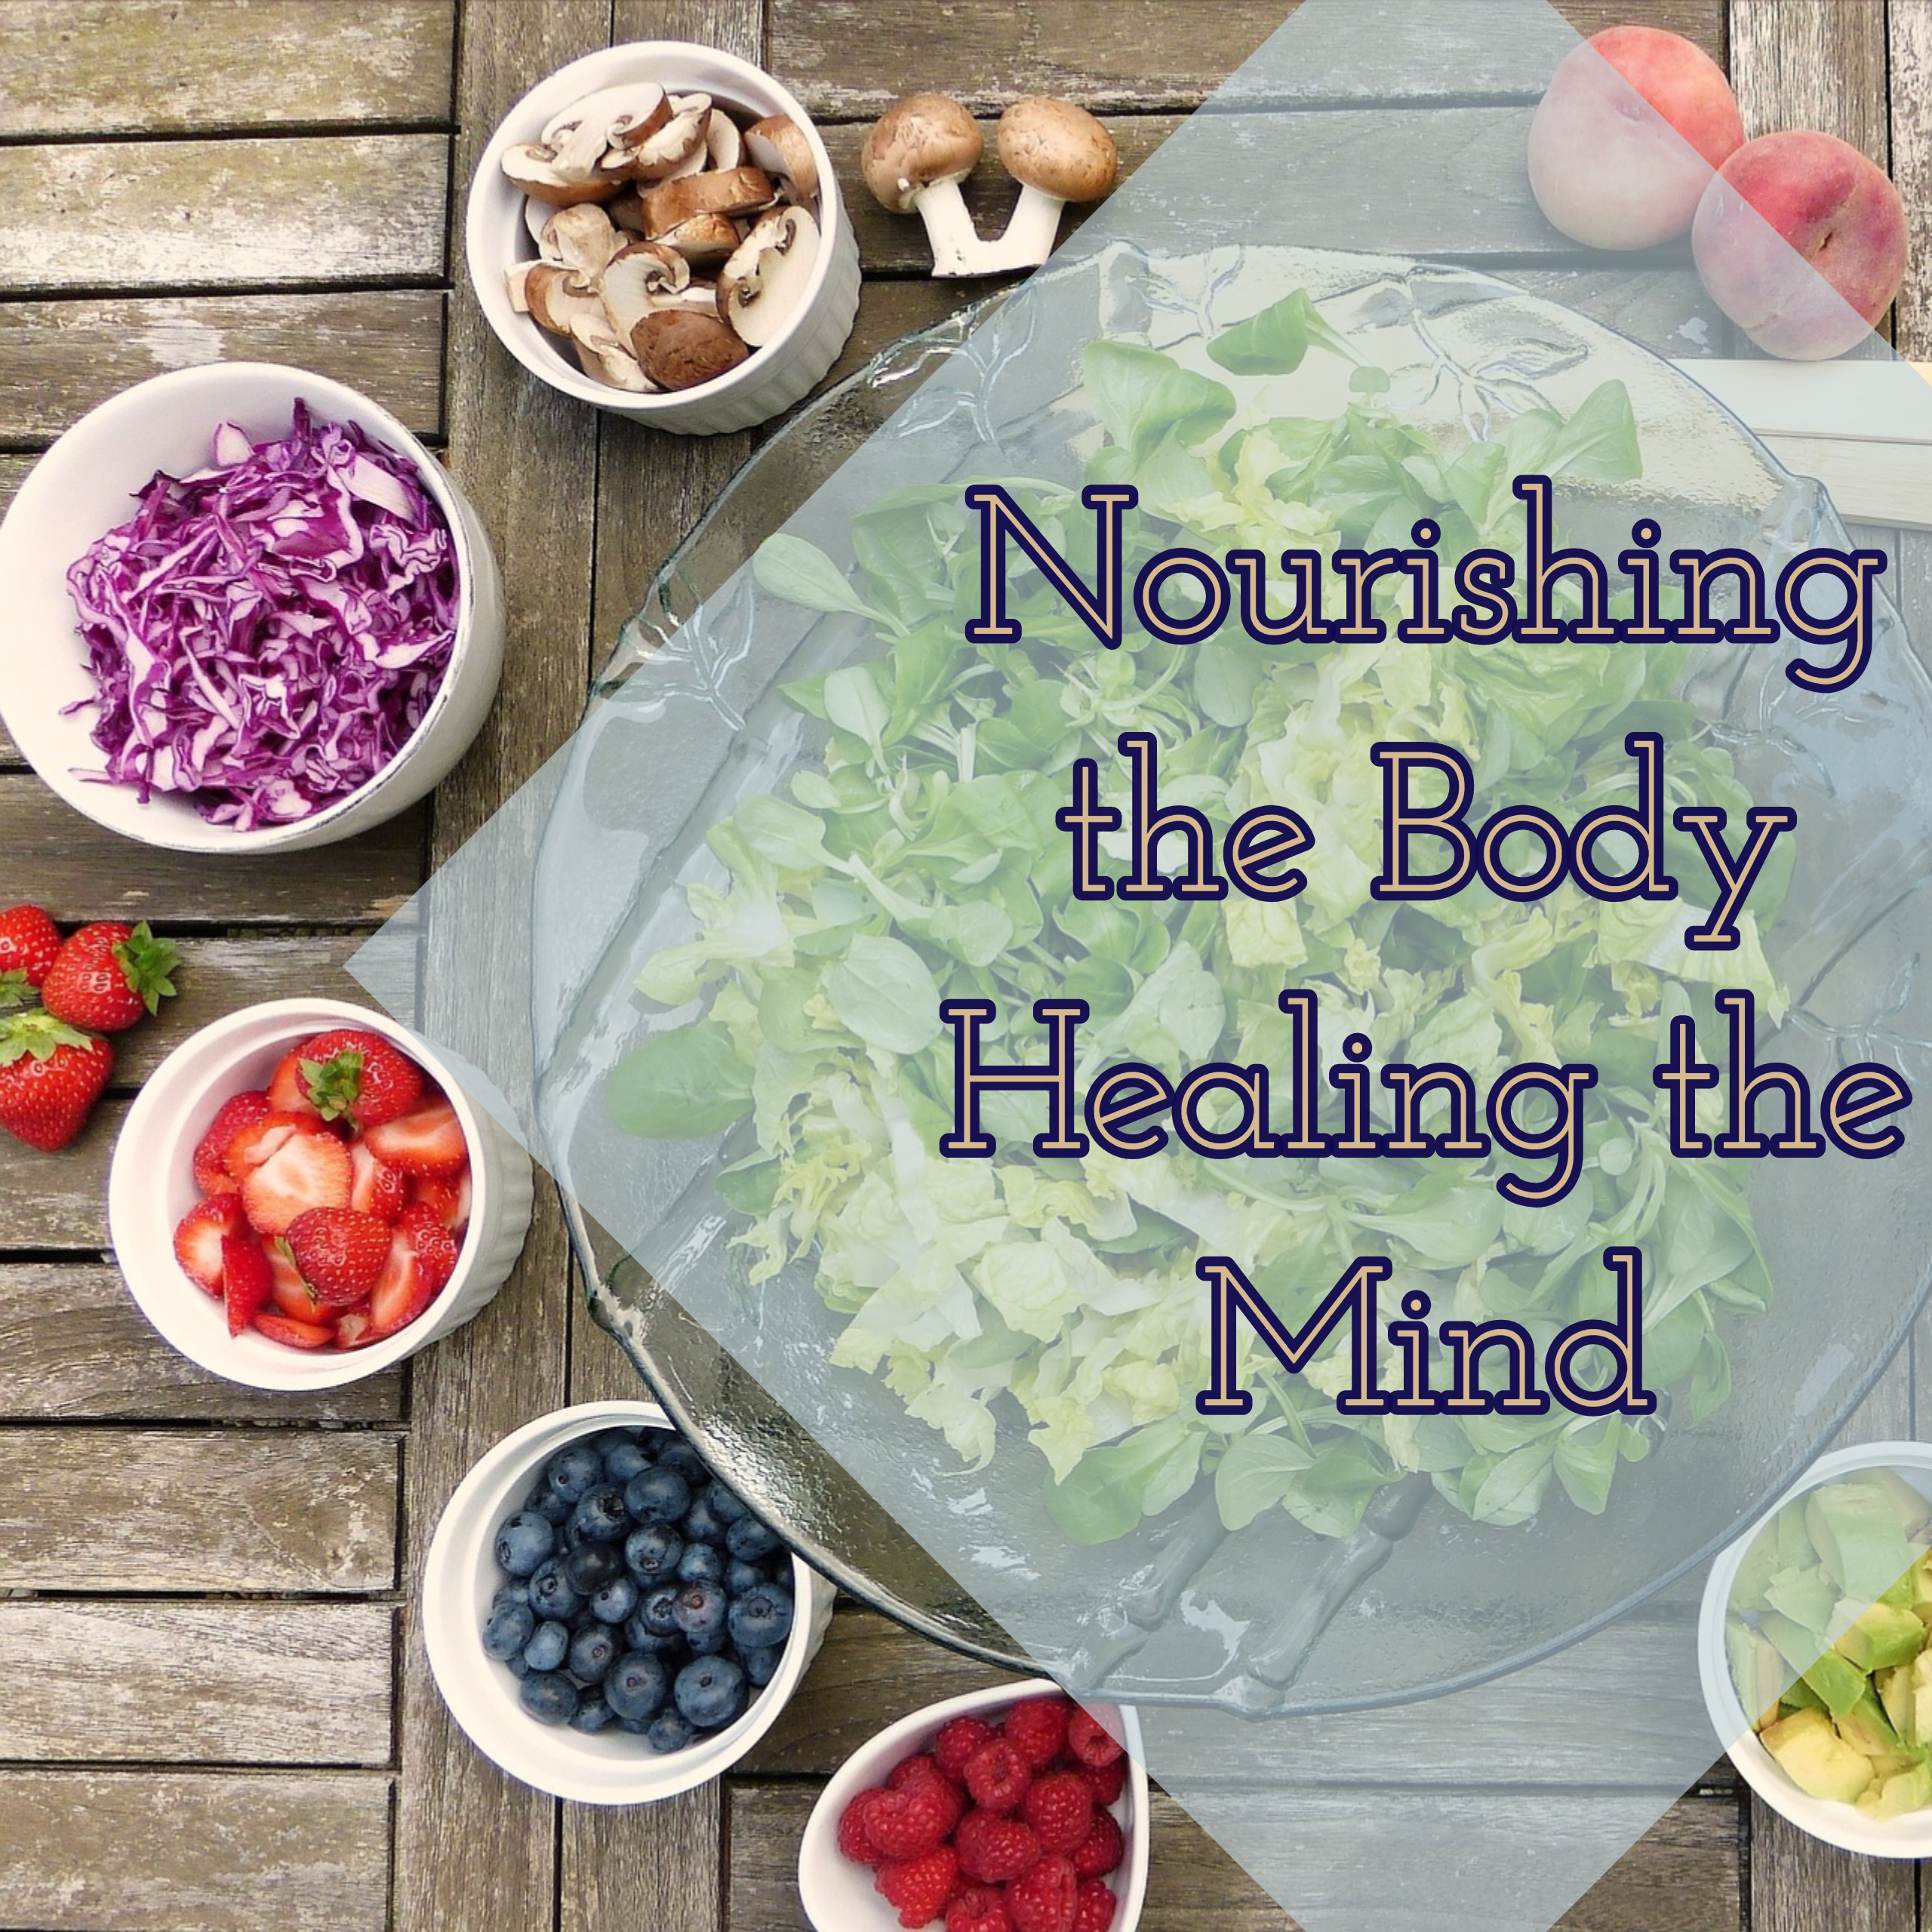 Nourishing the Body, Healing the Mind: The Link Between Food and Mental Health